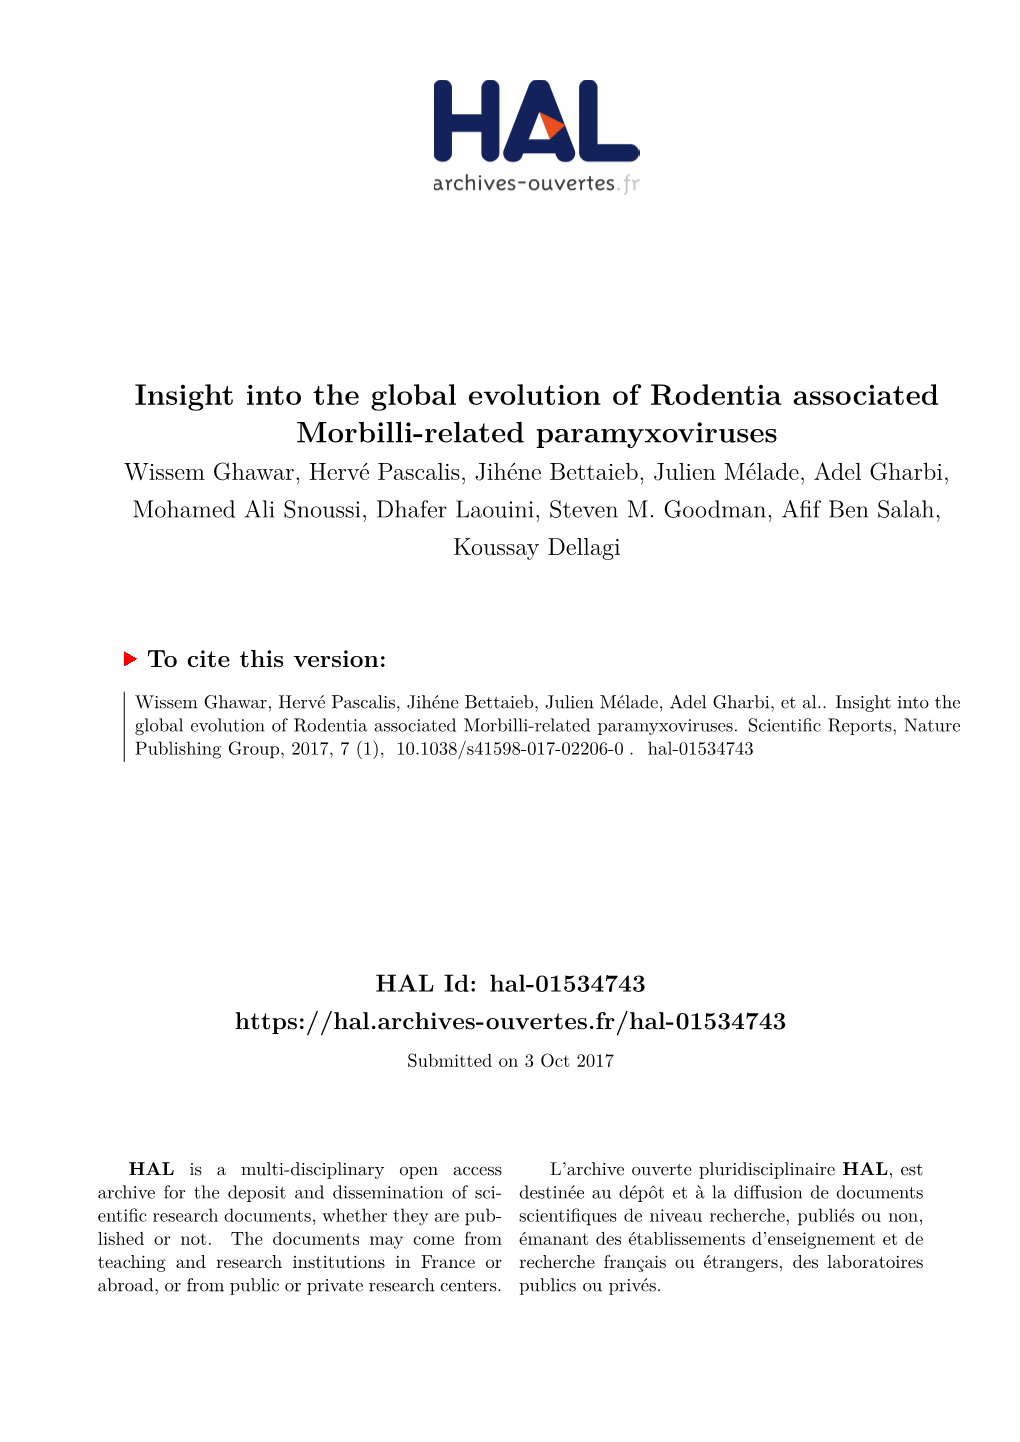 Insight Into the Global Evolution of Rodentia Associated Morbilli